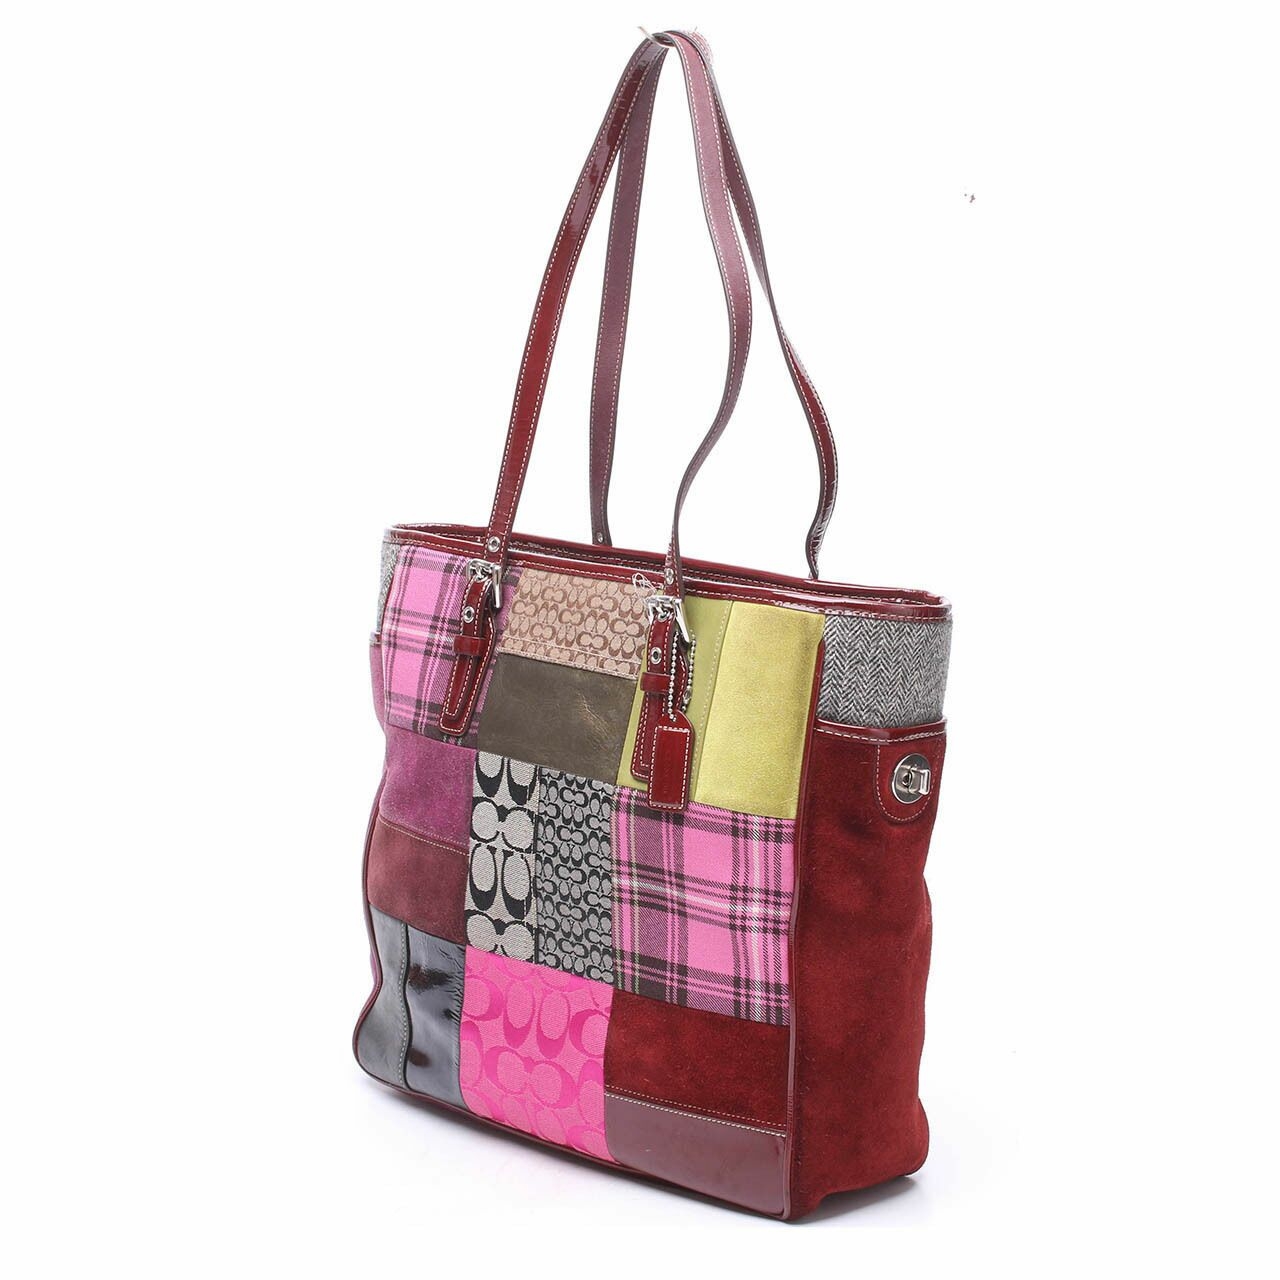 Coach Holiday Multi Color Patchwork Tote Hand Bag	